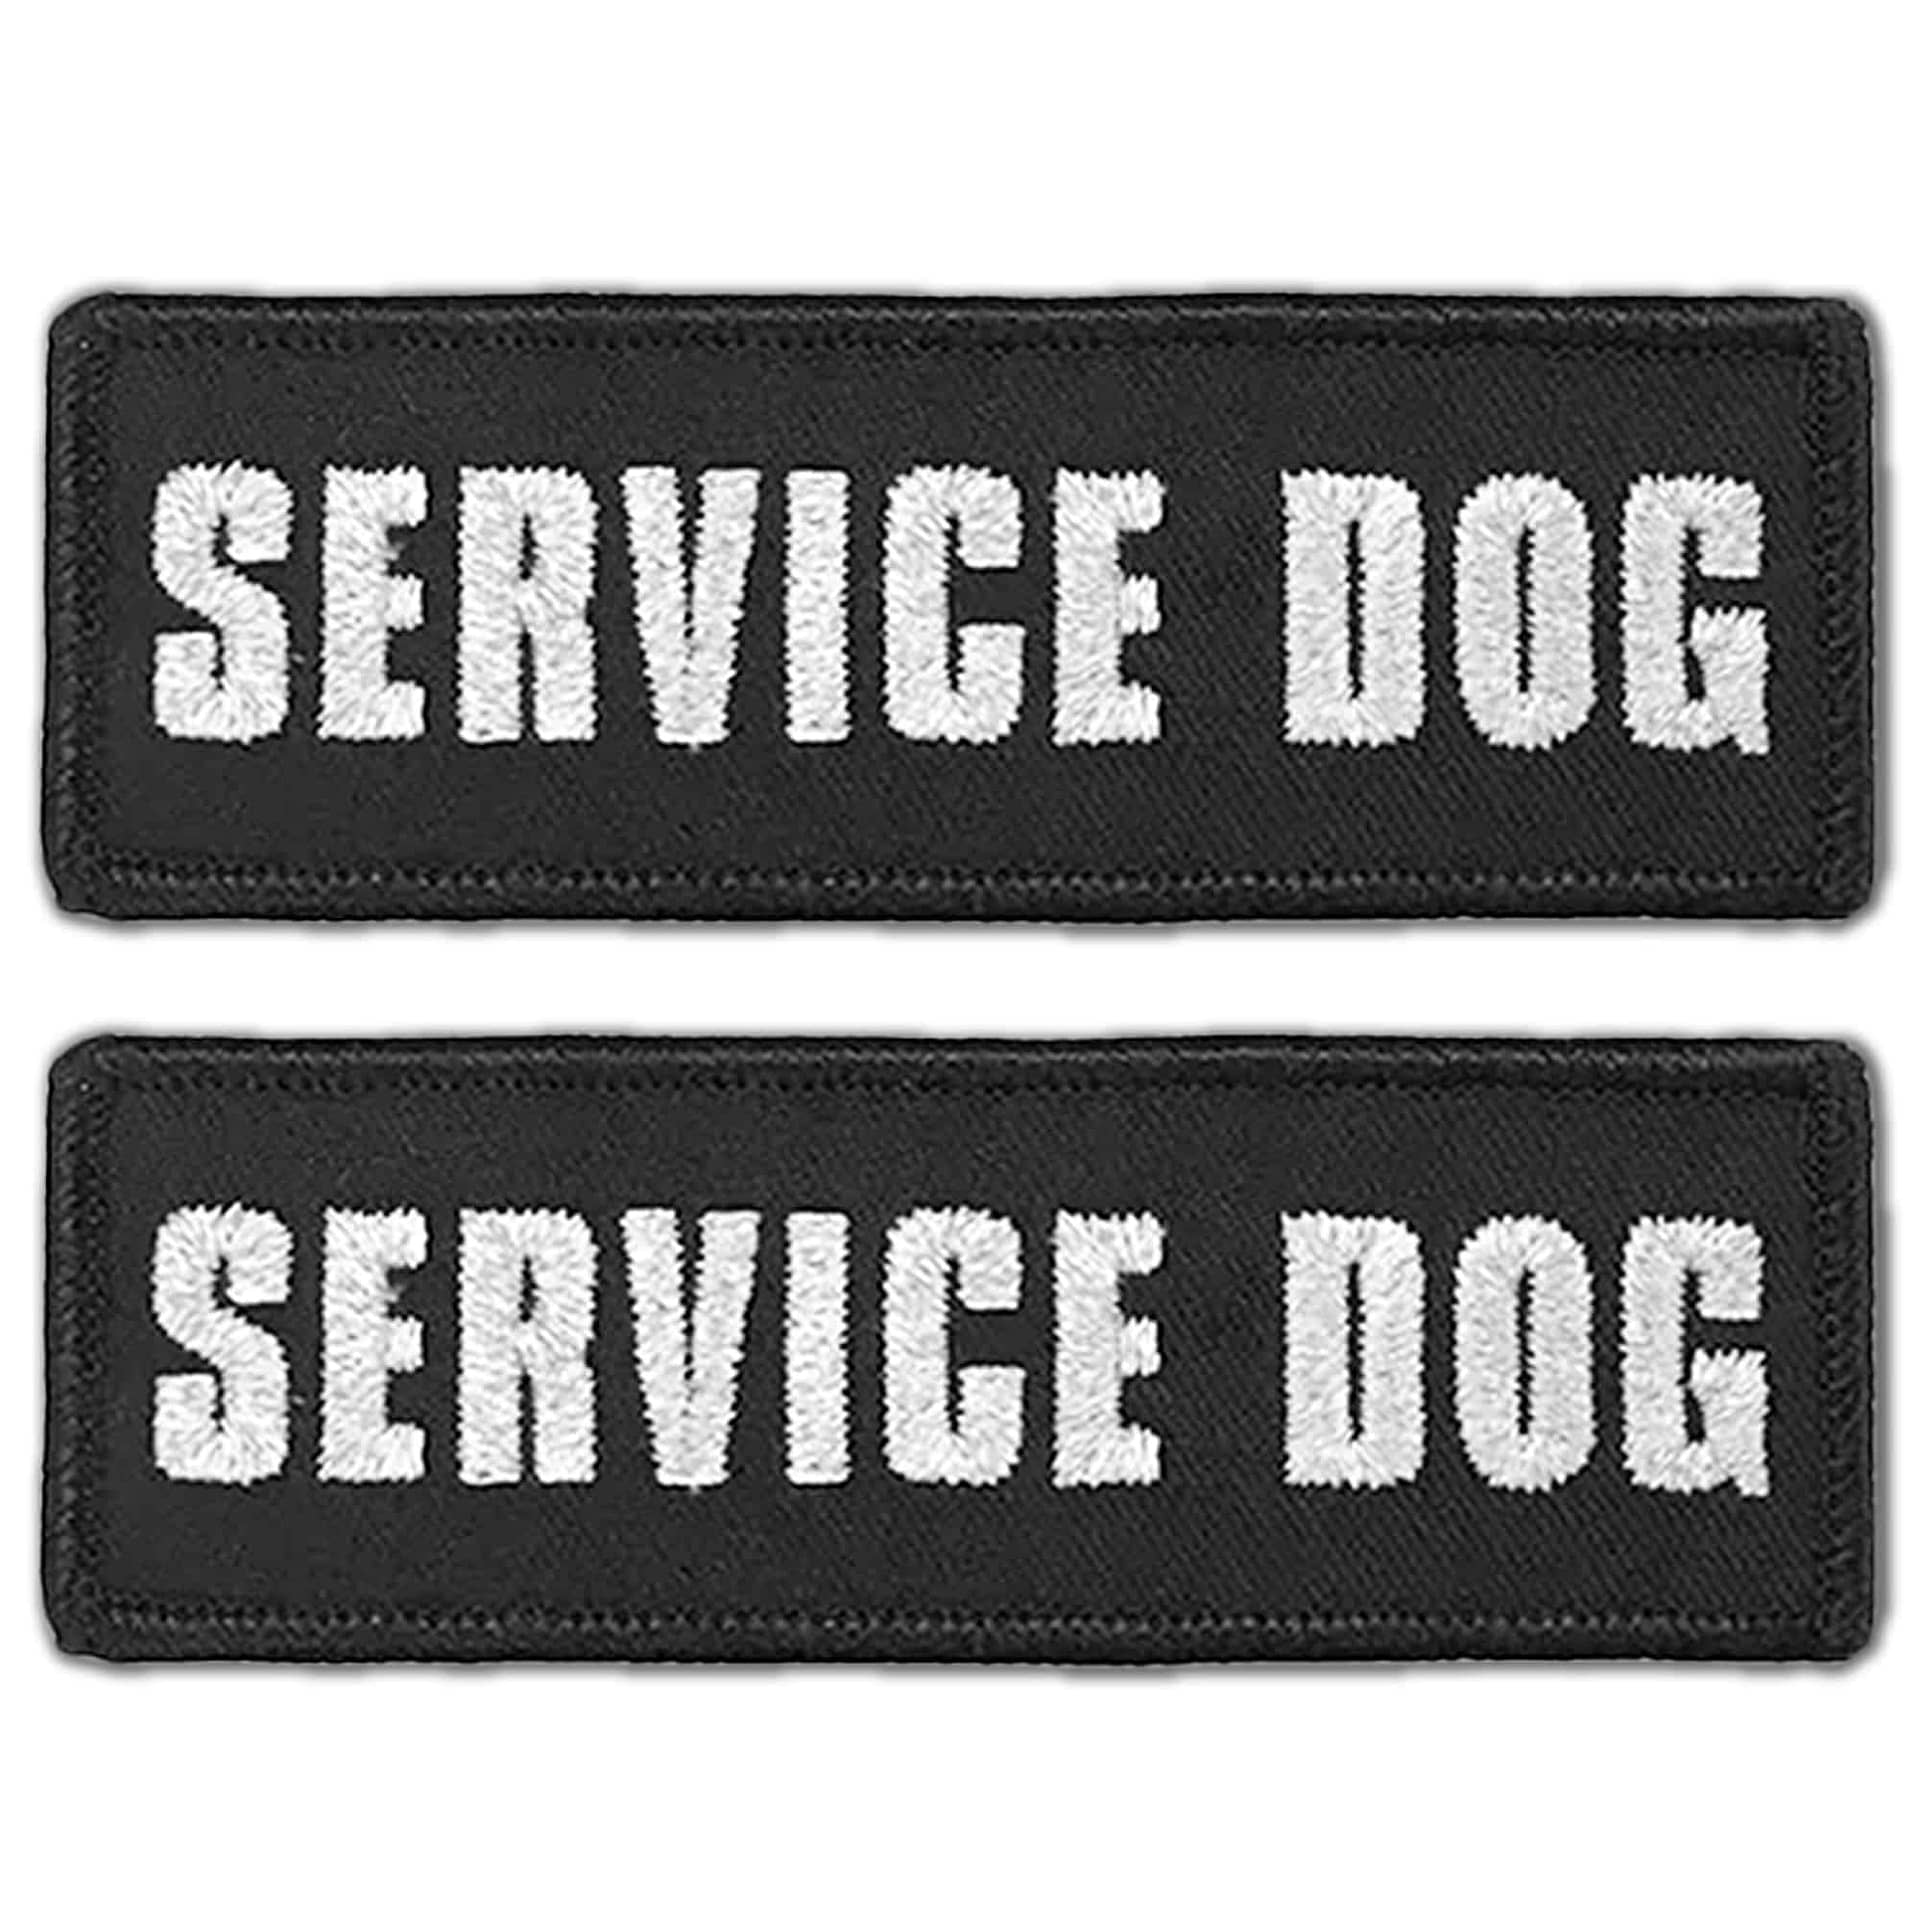 13 Pack Dog Patches Do Not PET Patch Removable Service Dog Tactical in  Training Working Dog Embroidery Service Dog Vest Patches for Animal Vest